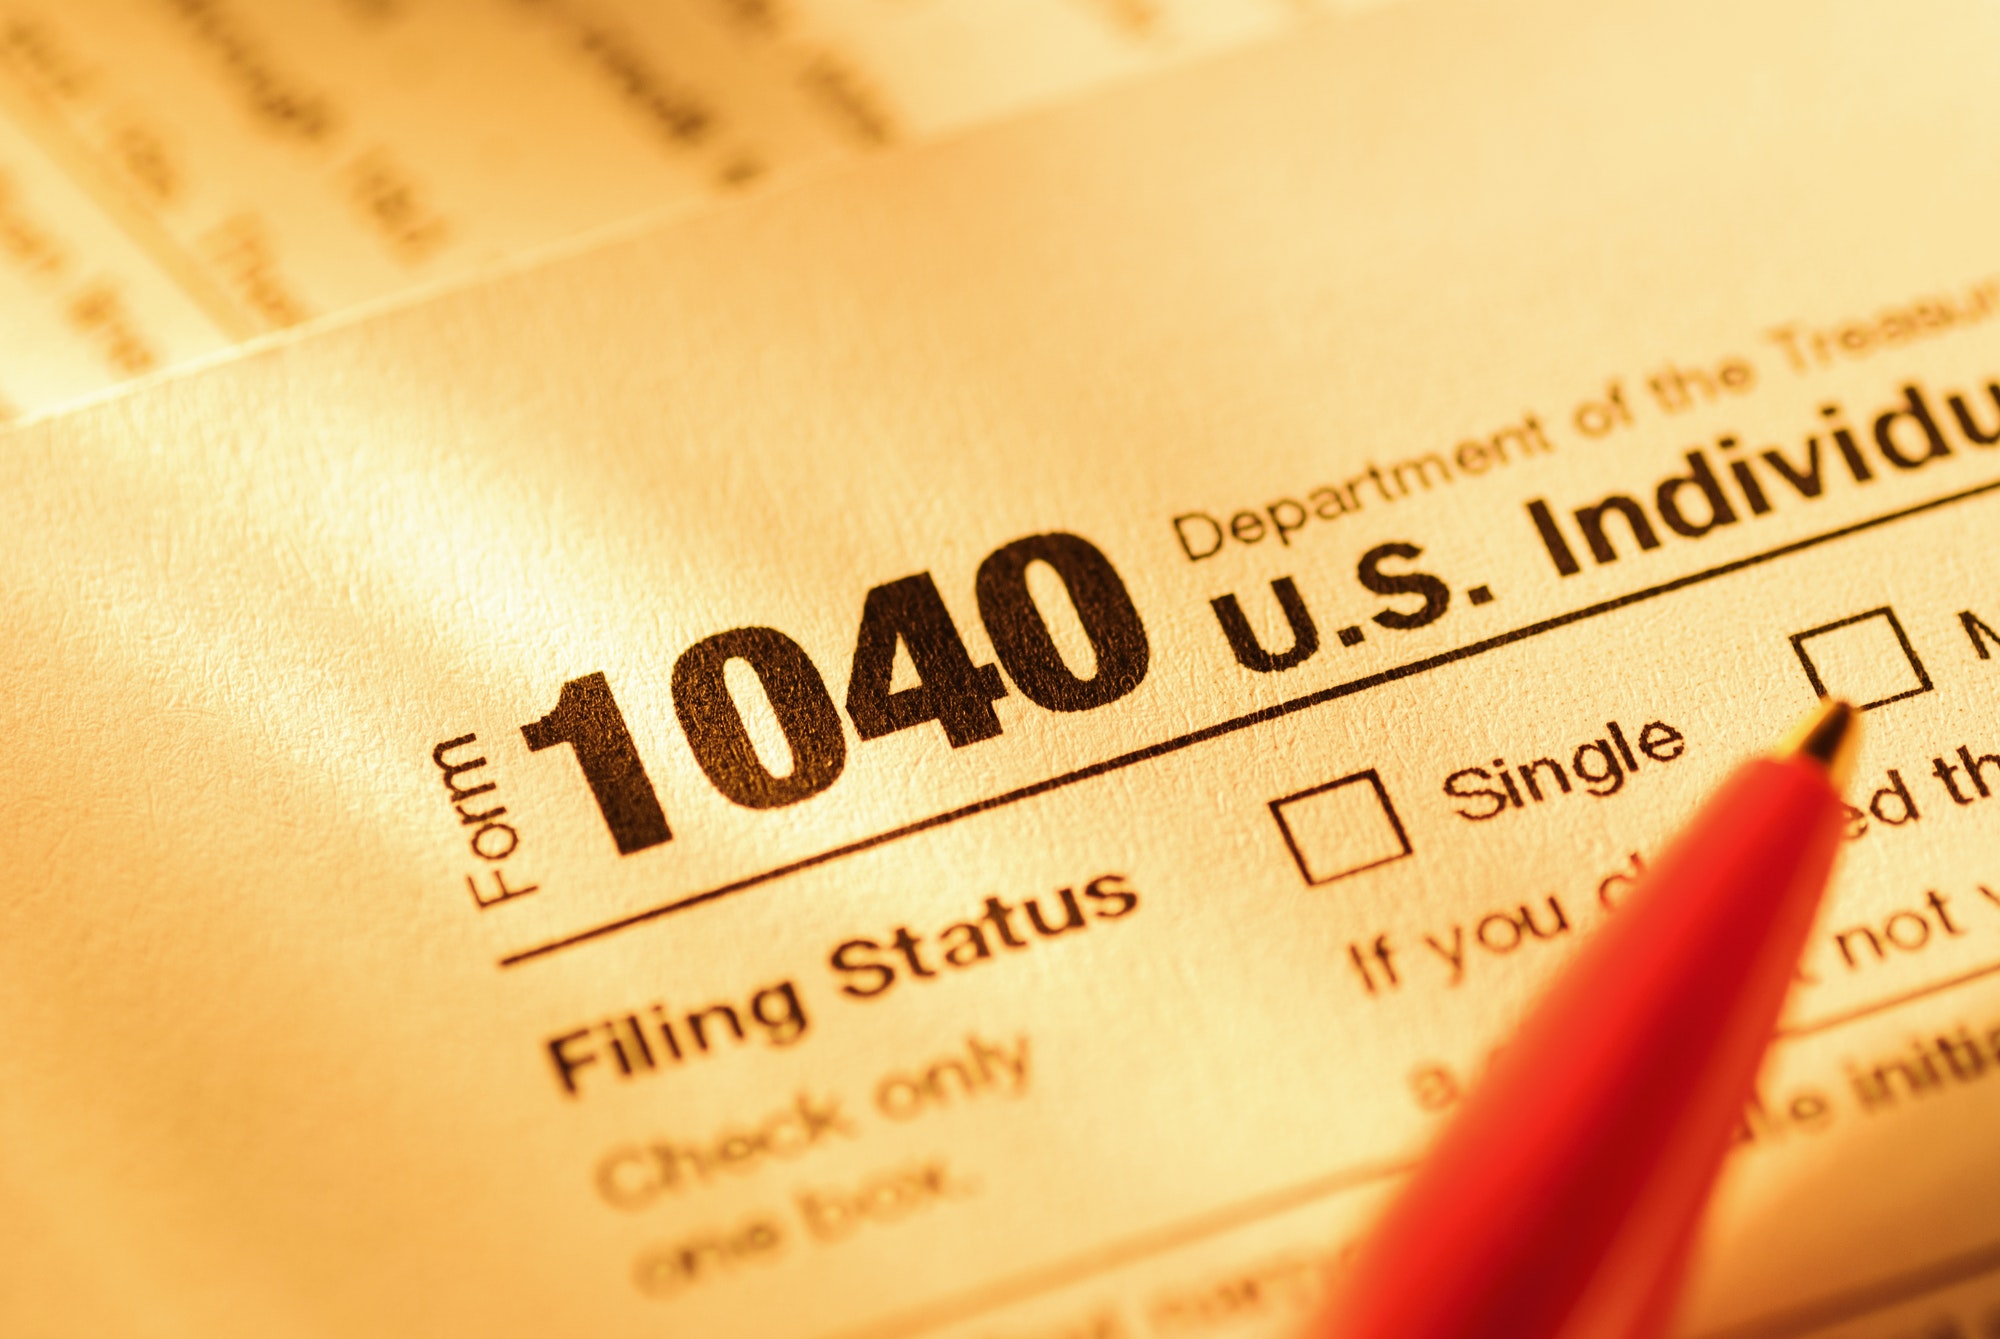 Form 1040 with red pen for US tax declaration